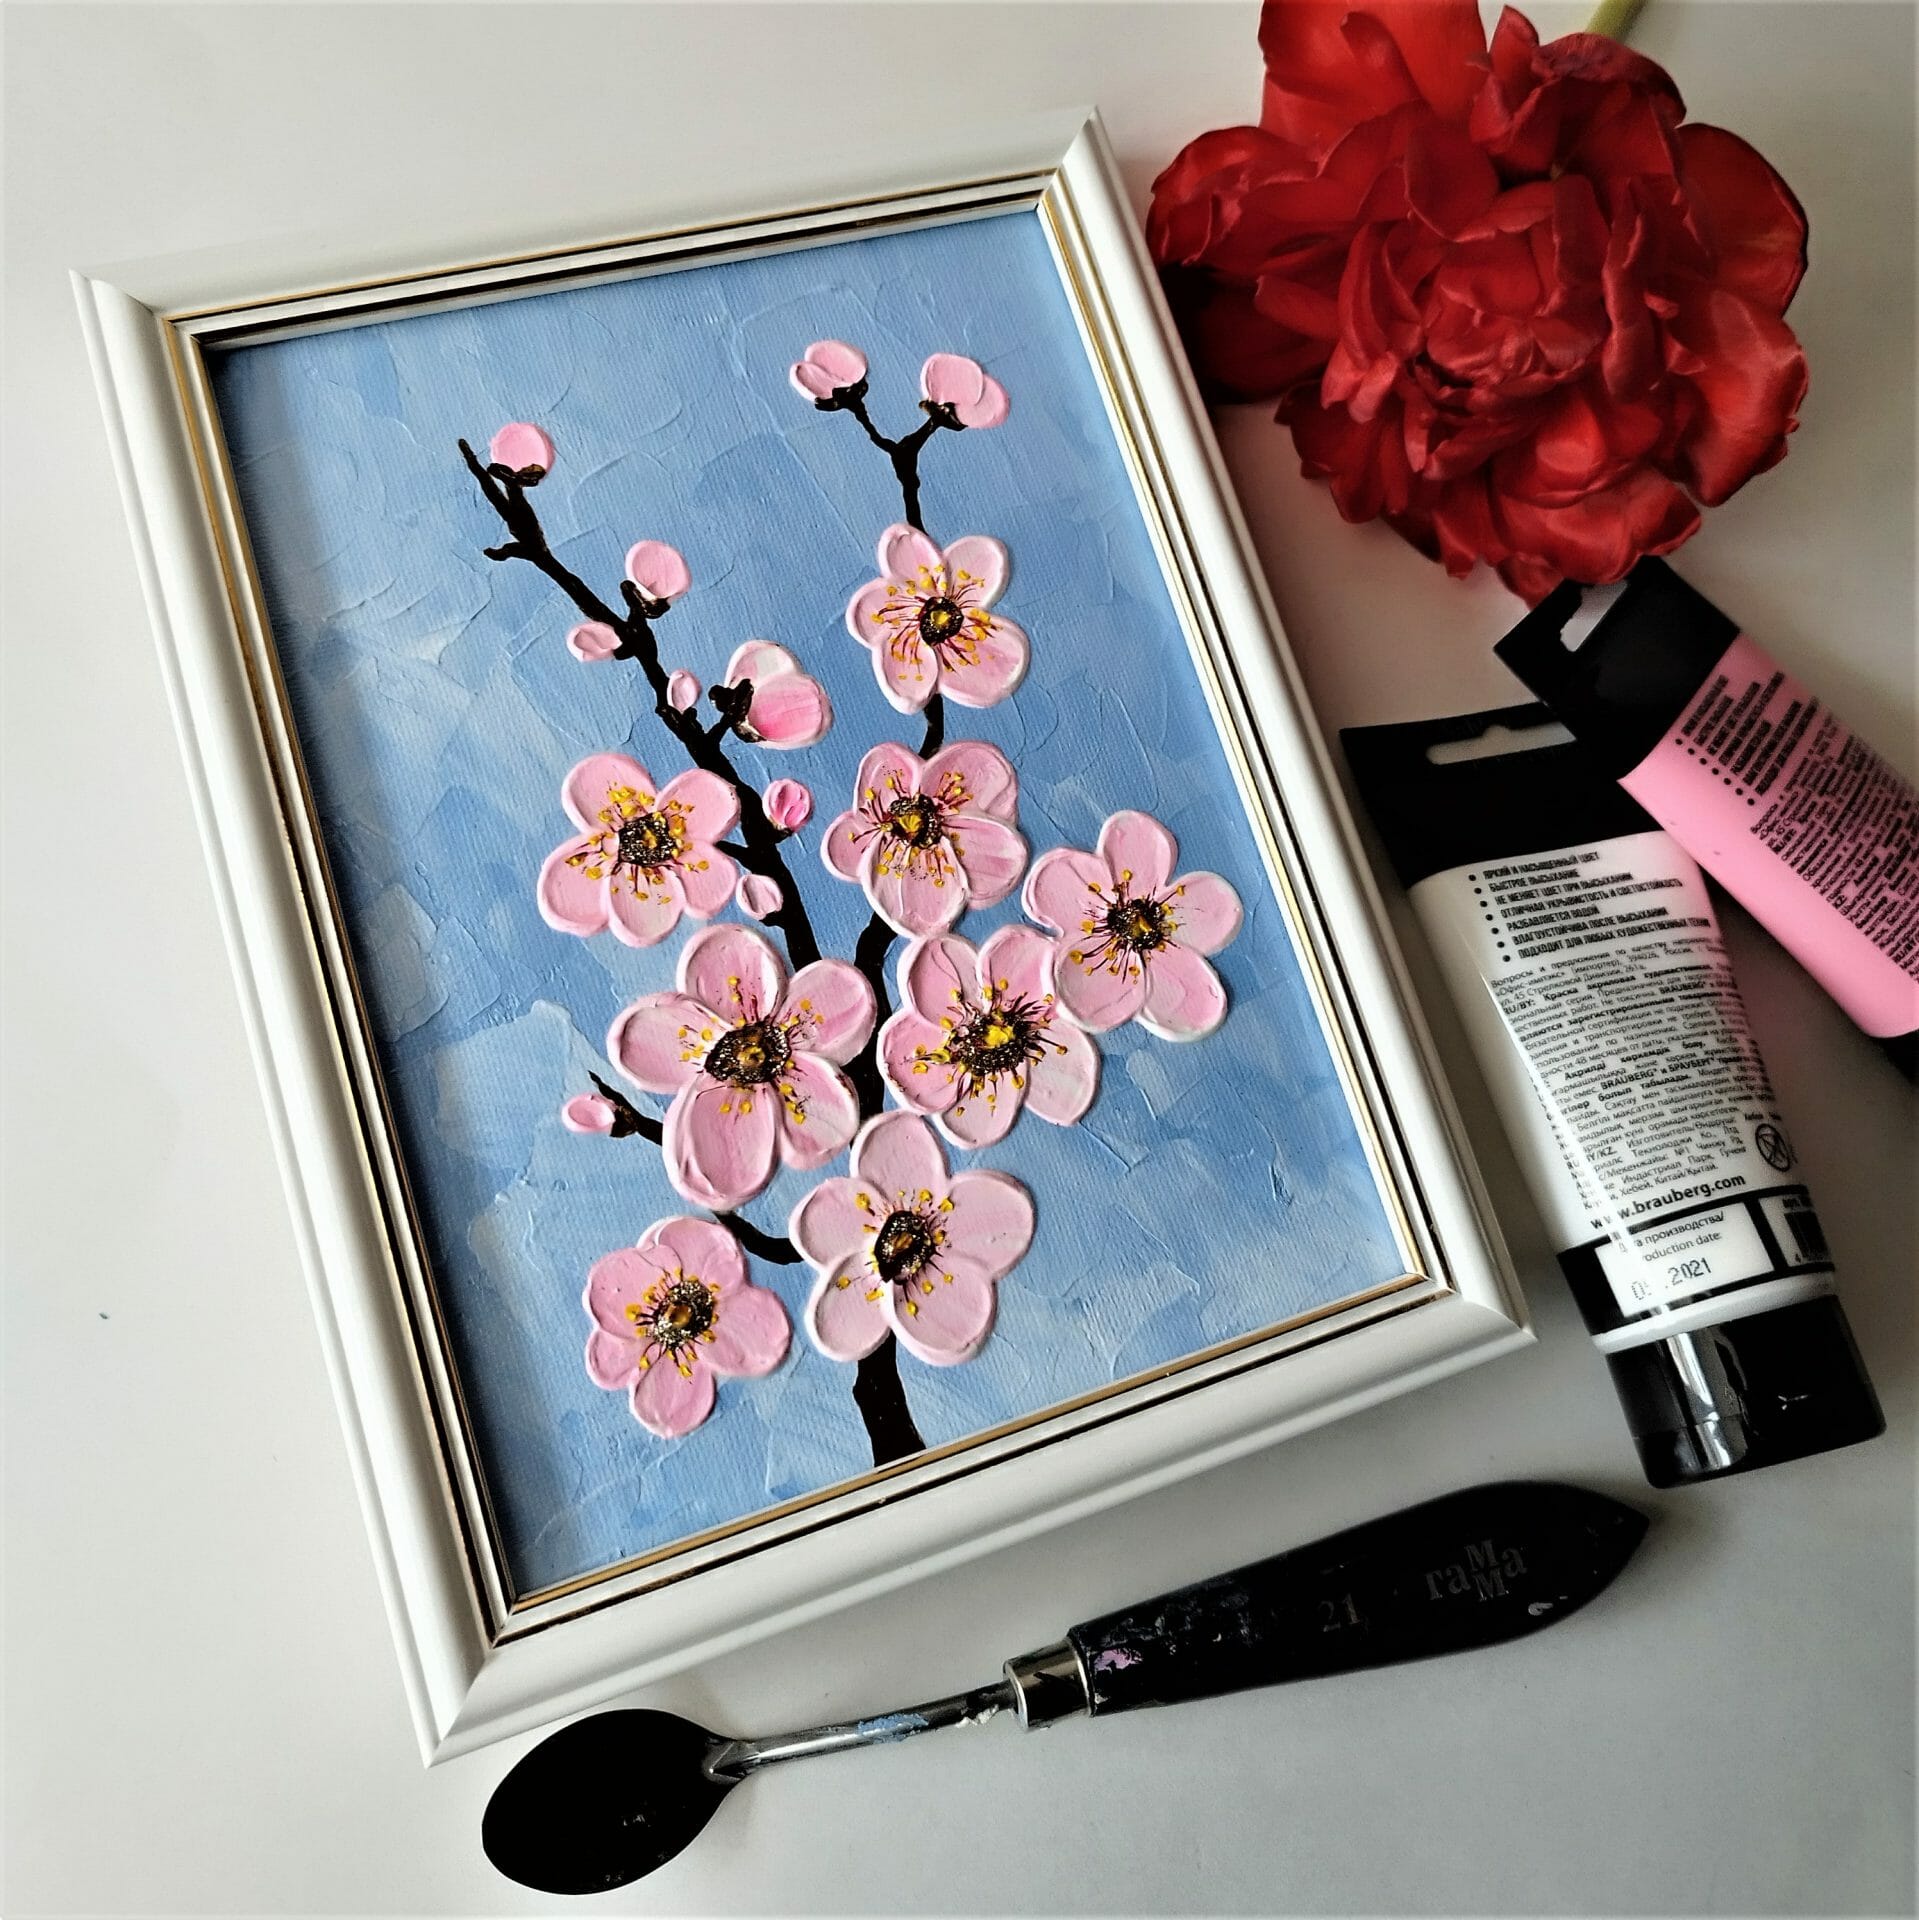 Cherry blossom painting textured art floral artwork